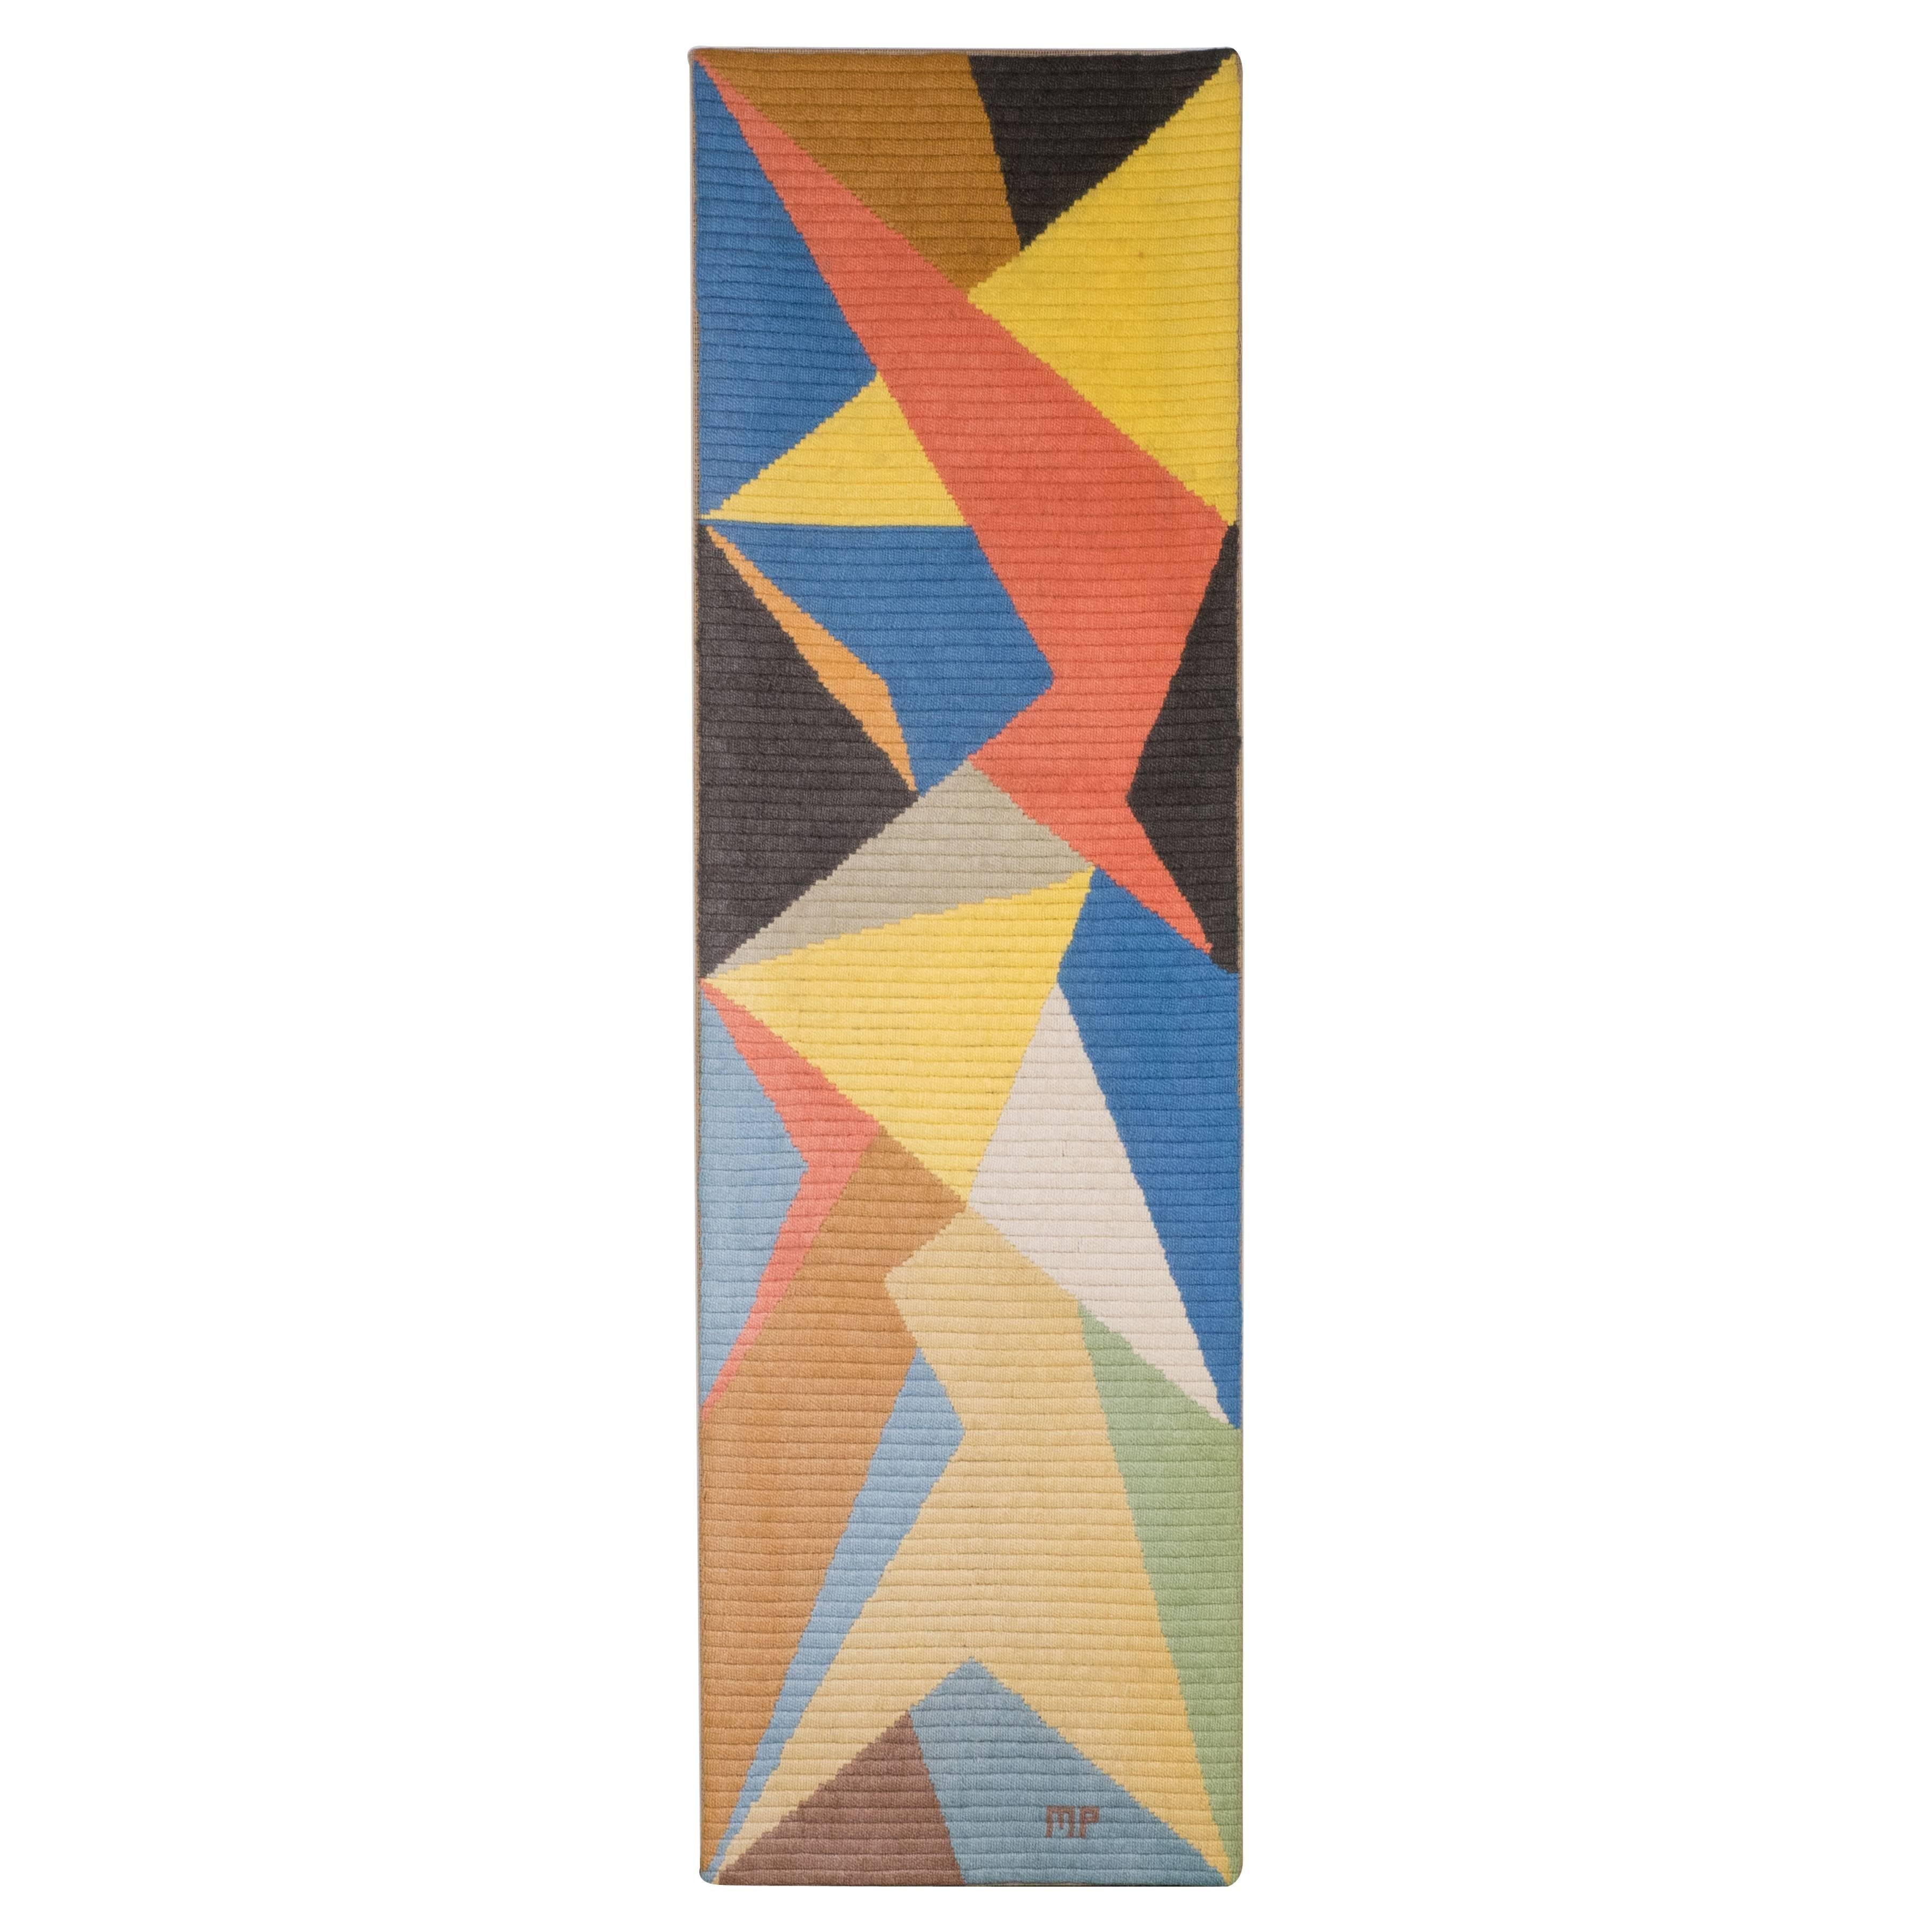 Dynamic Mid-Century Modernist Geometric Tapestry Wall Hanging - Art by Unknown